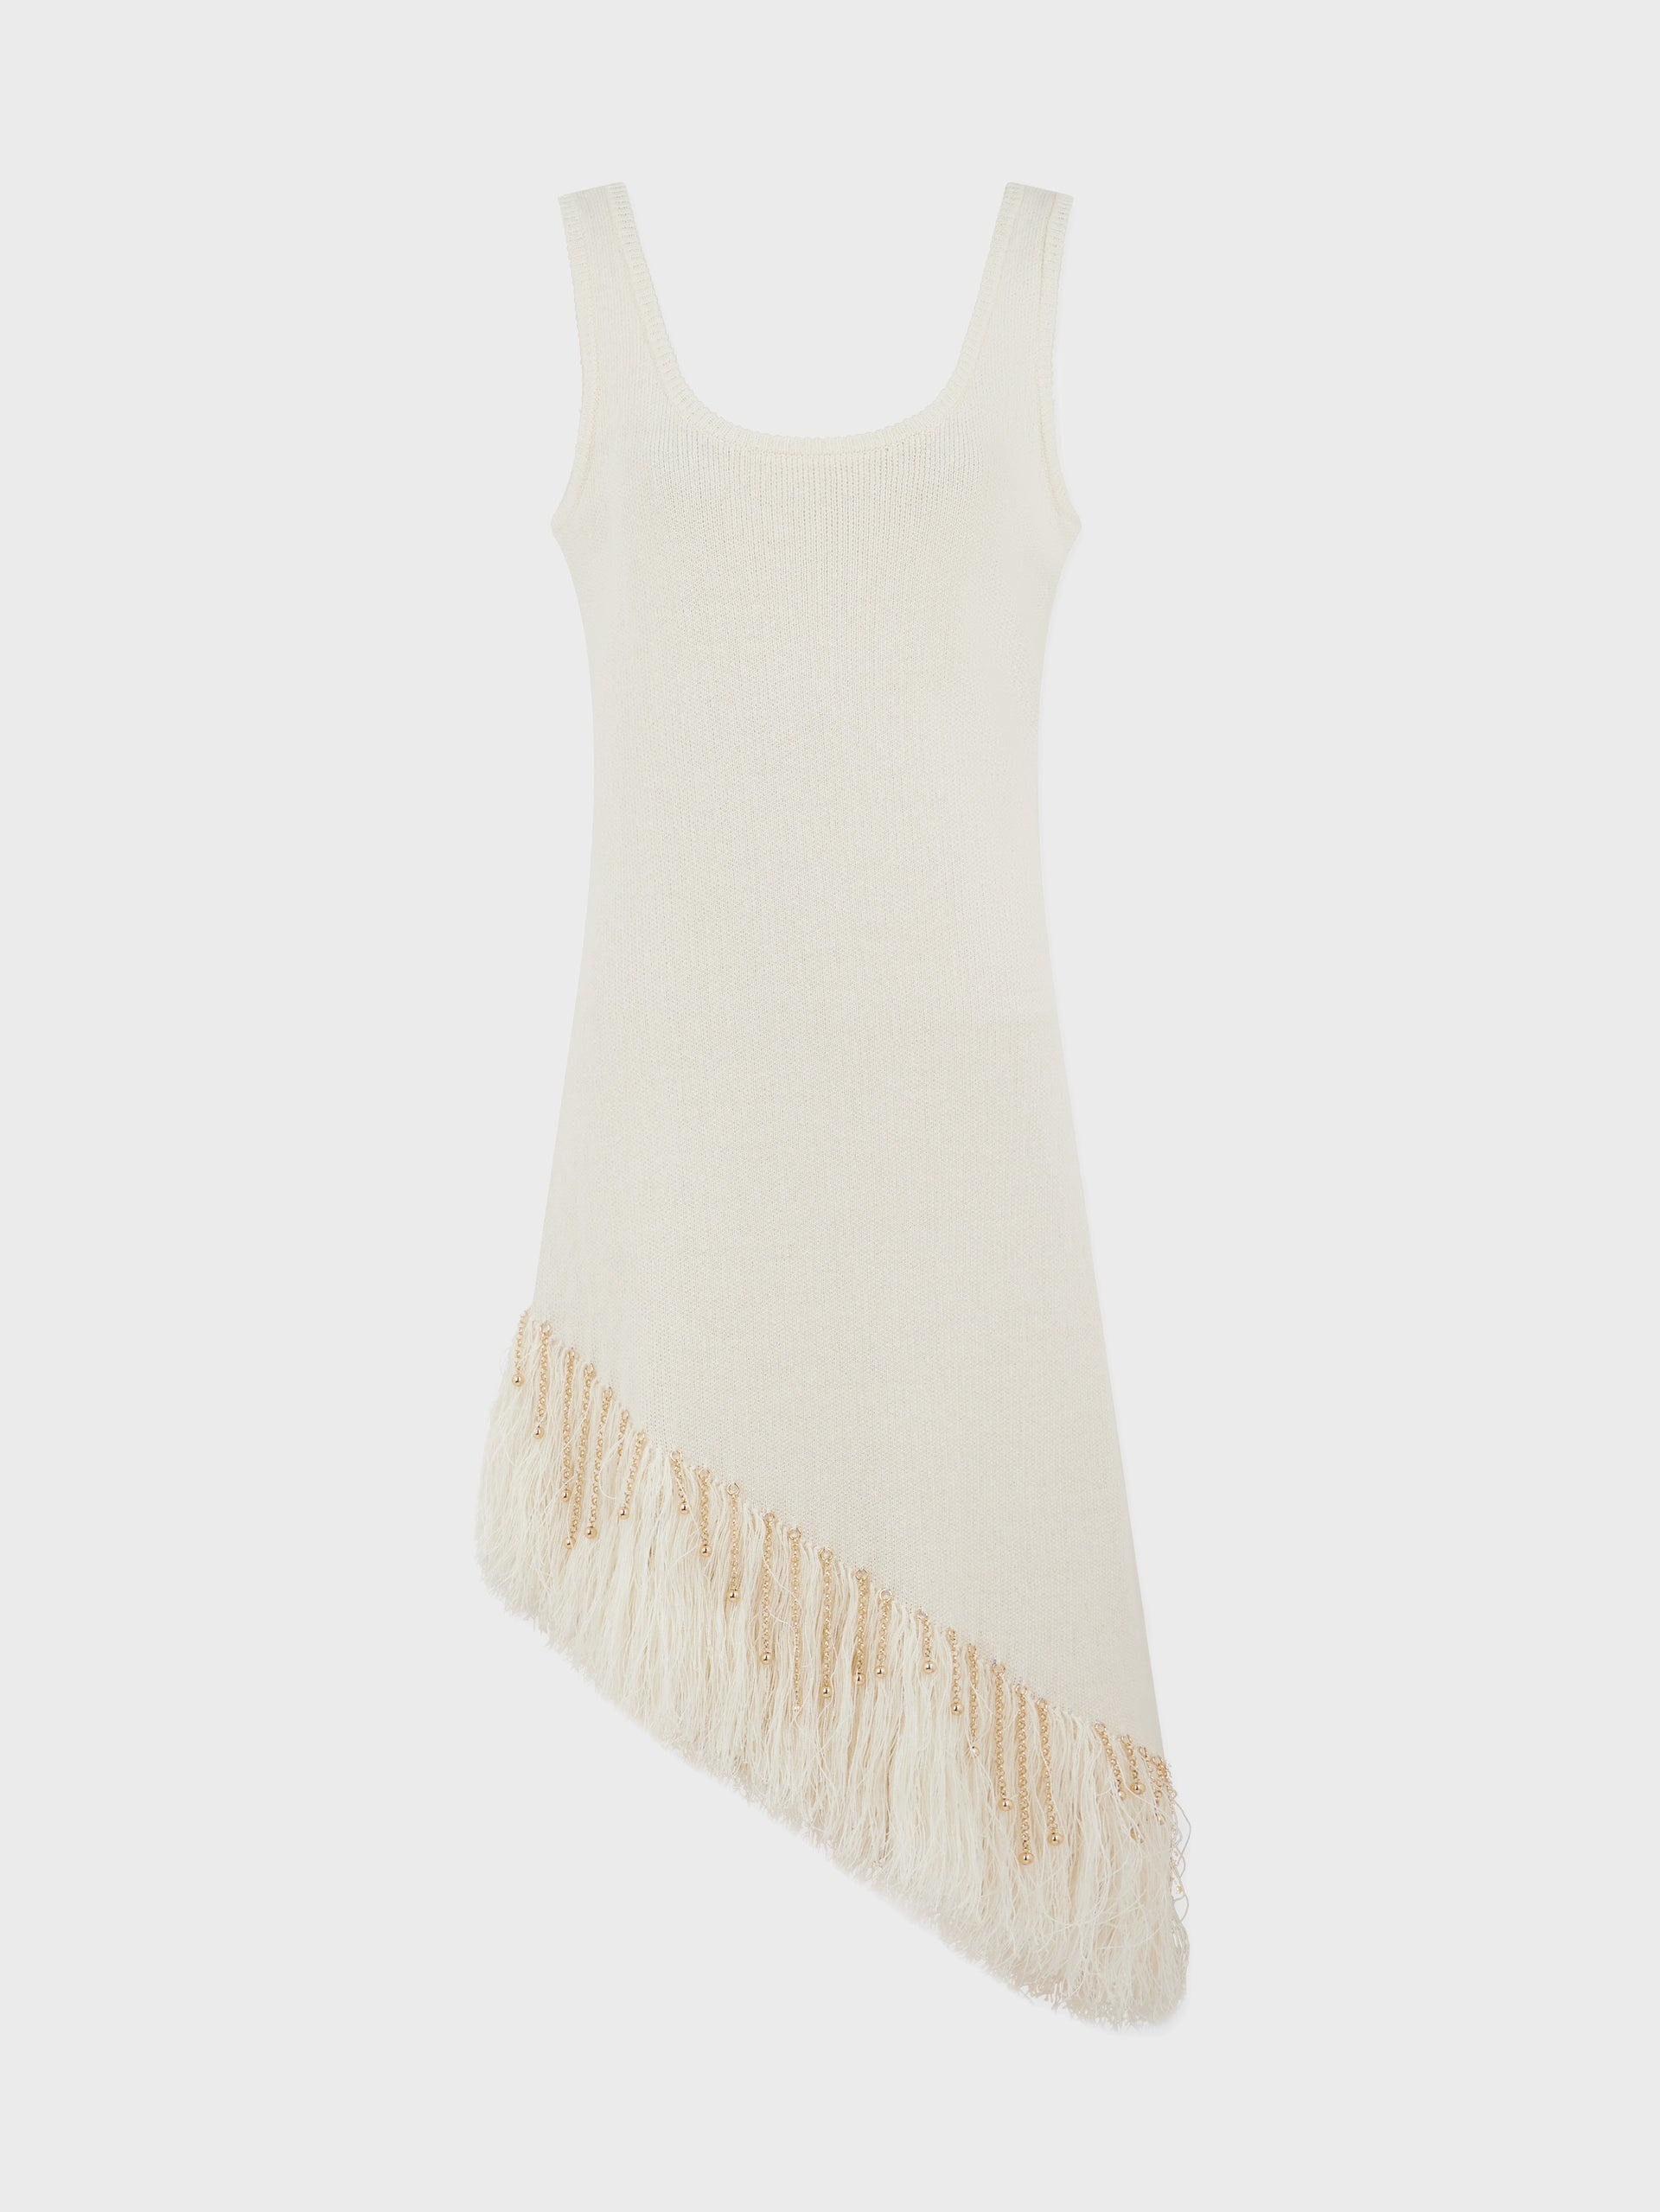 ASYMMETRICAL OFF WHITE WOVEN DRESS WITH KNITTED BEADS AND FEATHERS - 1